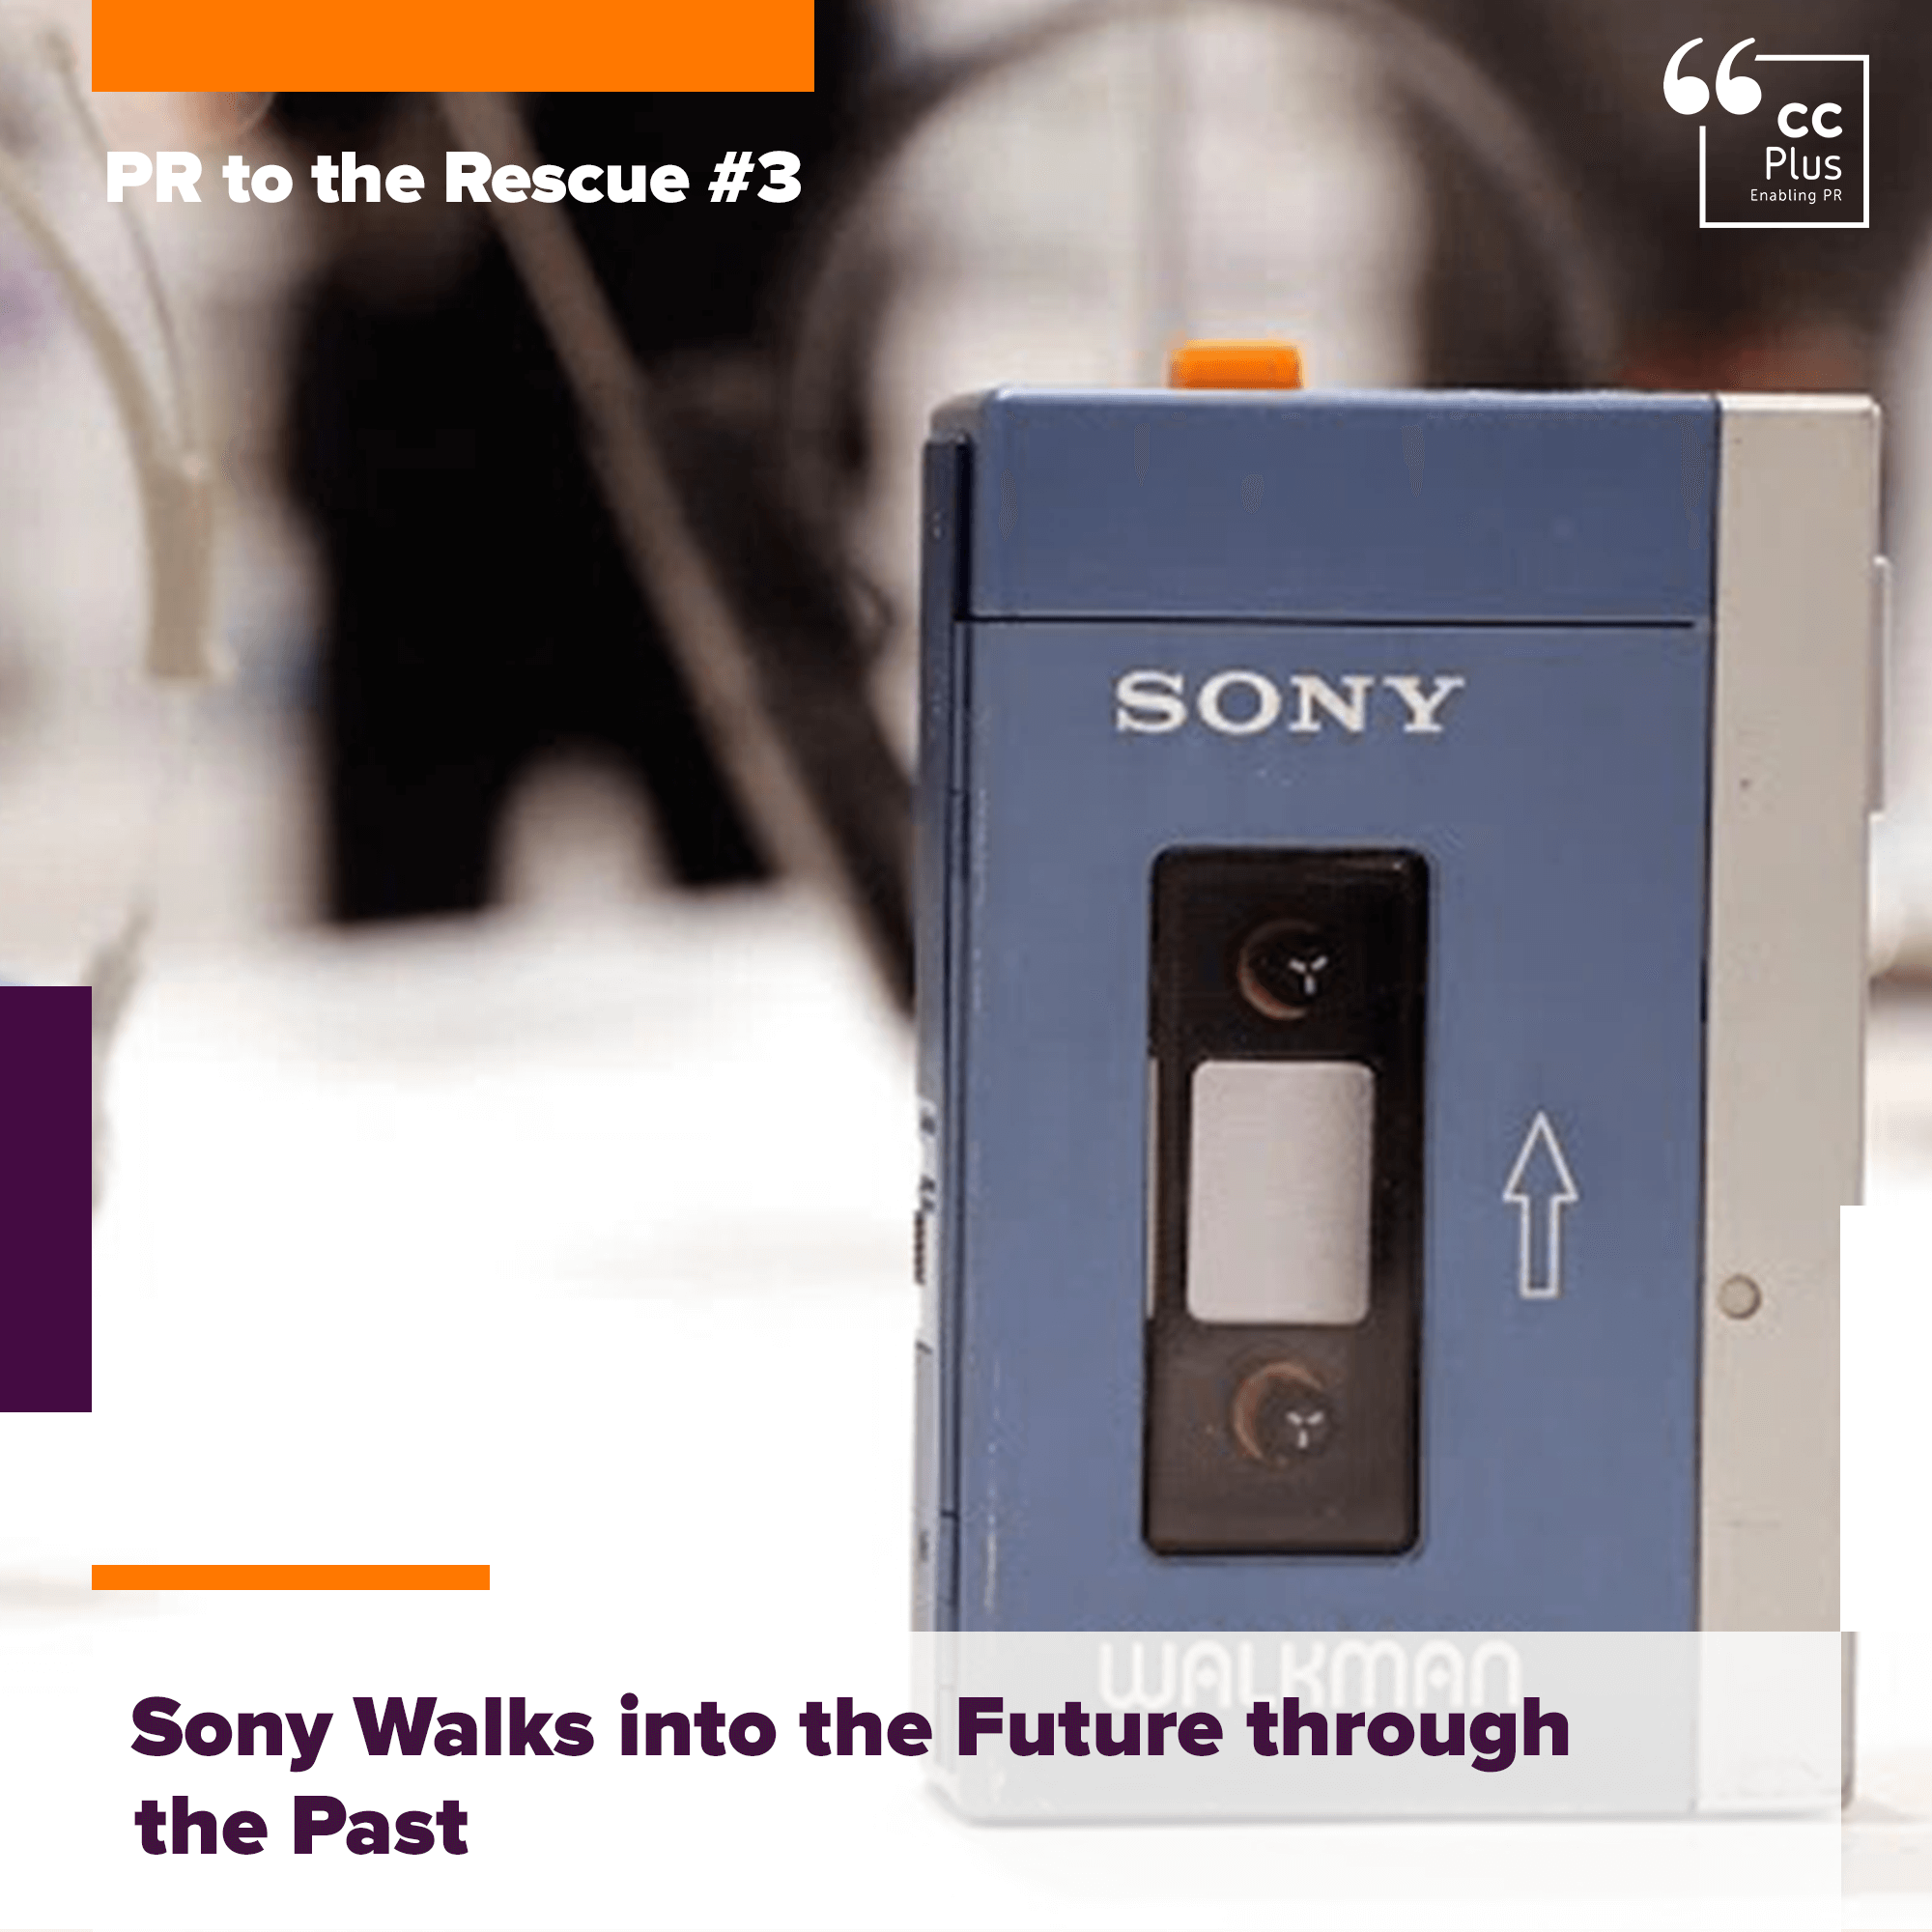 PR to the Rescue #3: Sony Walks into the Future through the Past